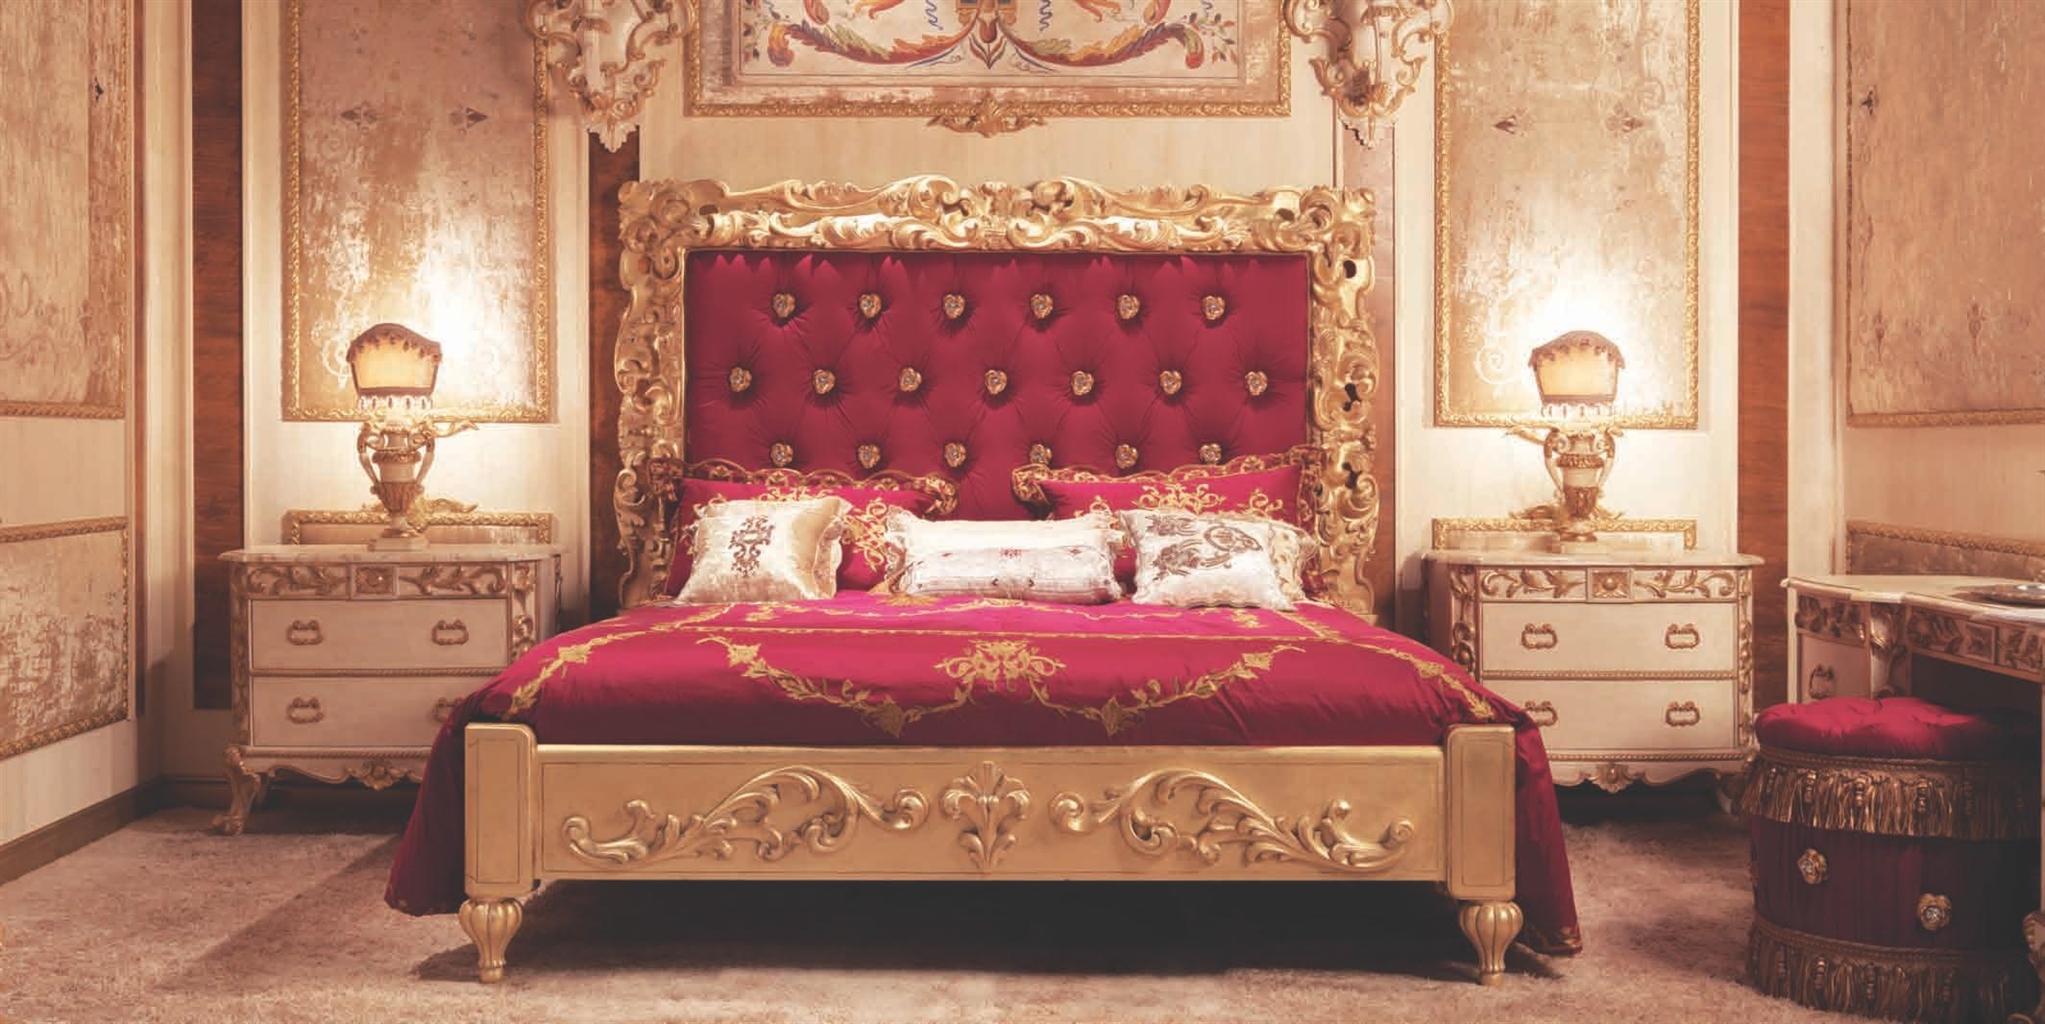 BEDS - Queen, King & California King Sizes Red Italian Style Master Bed with Tufted Headboard